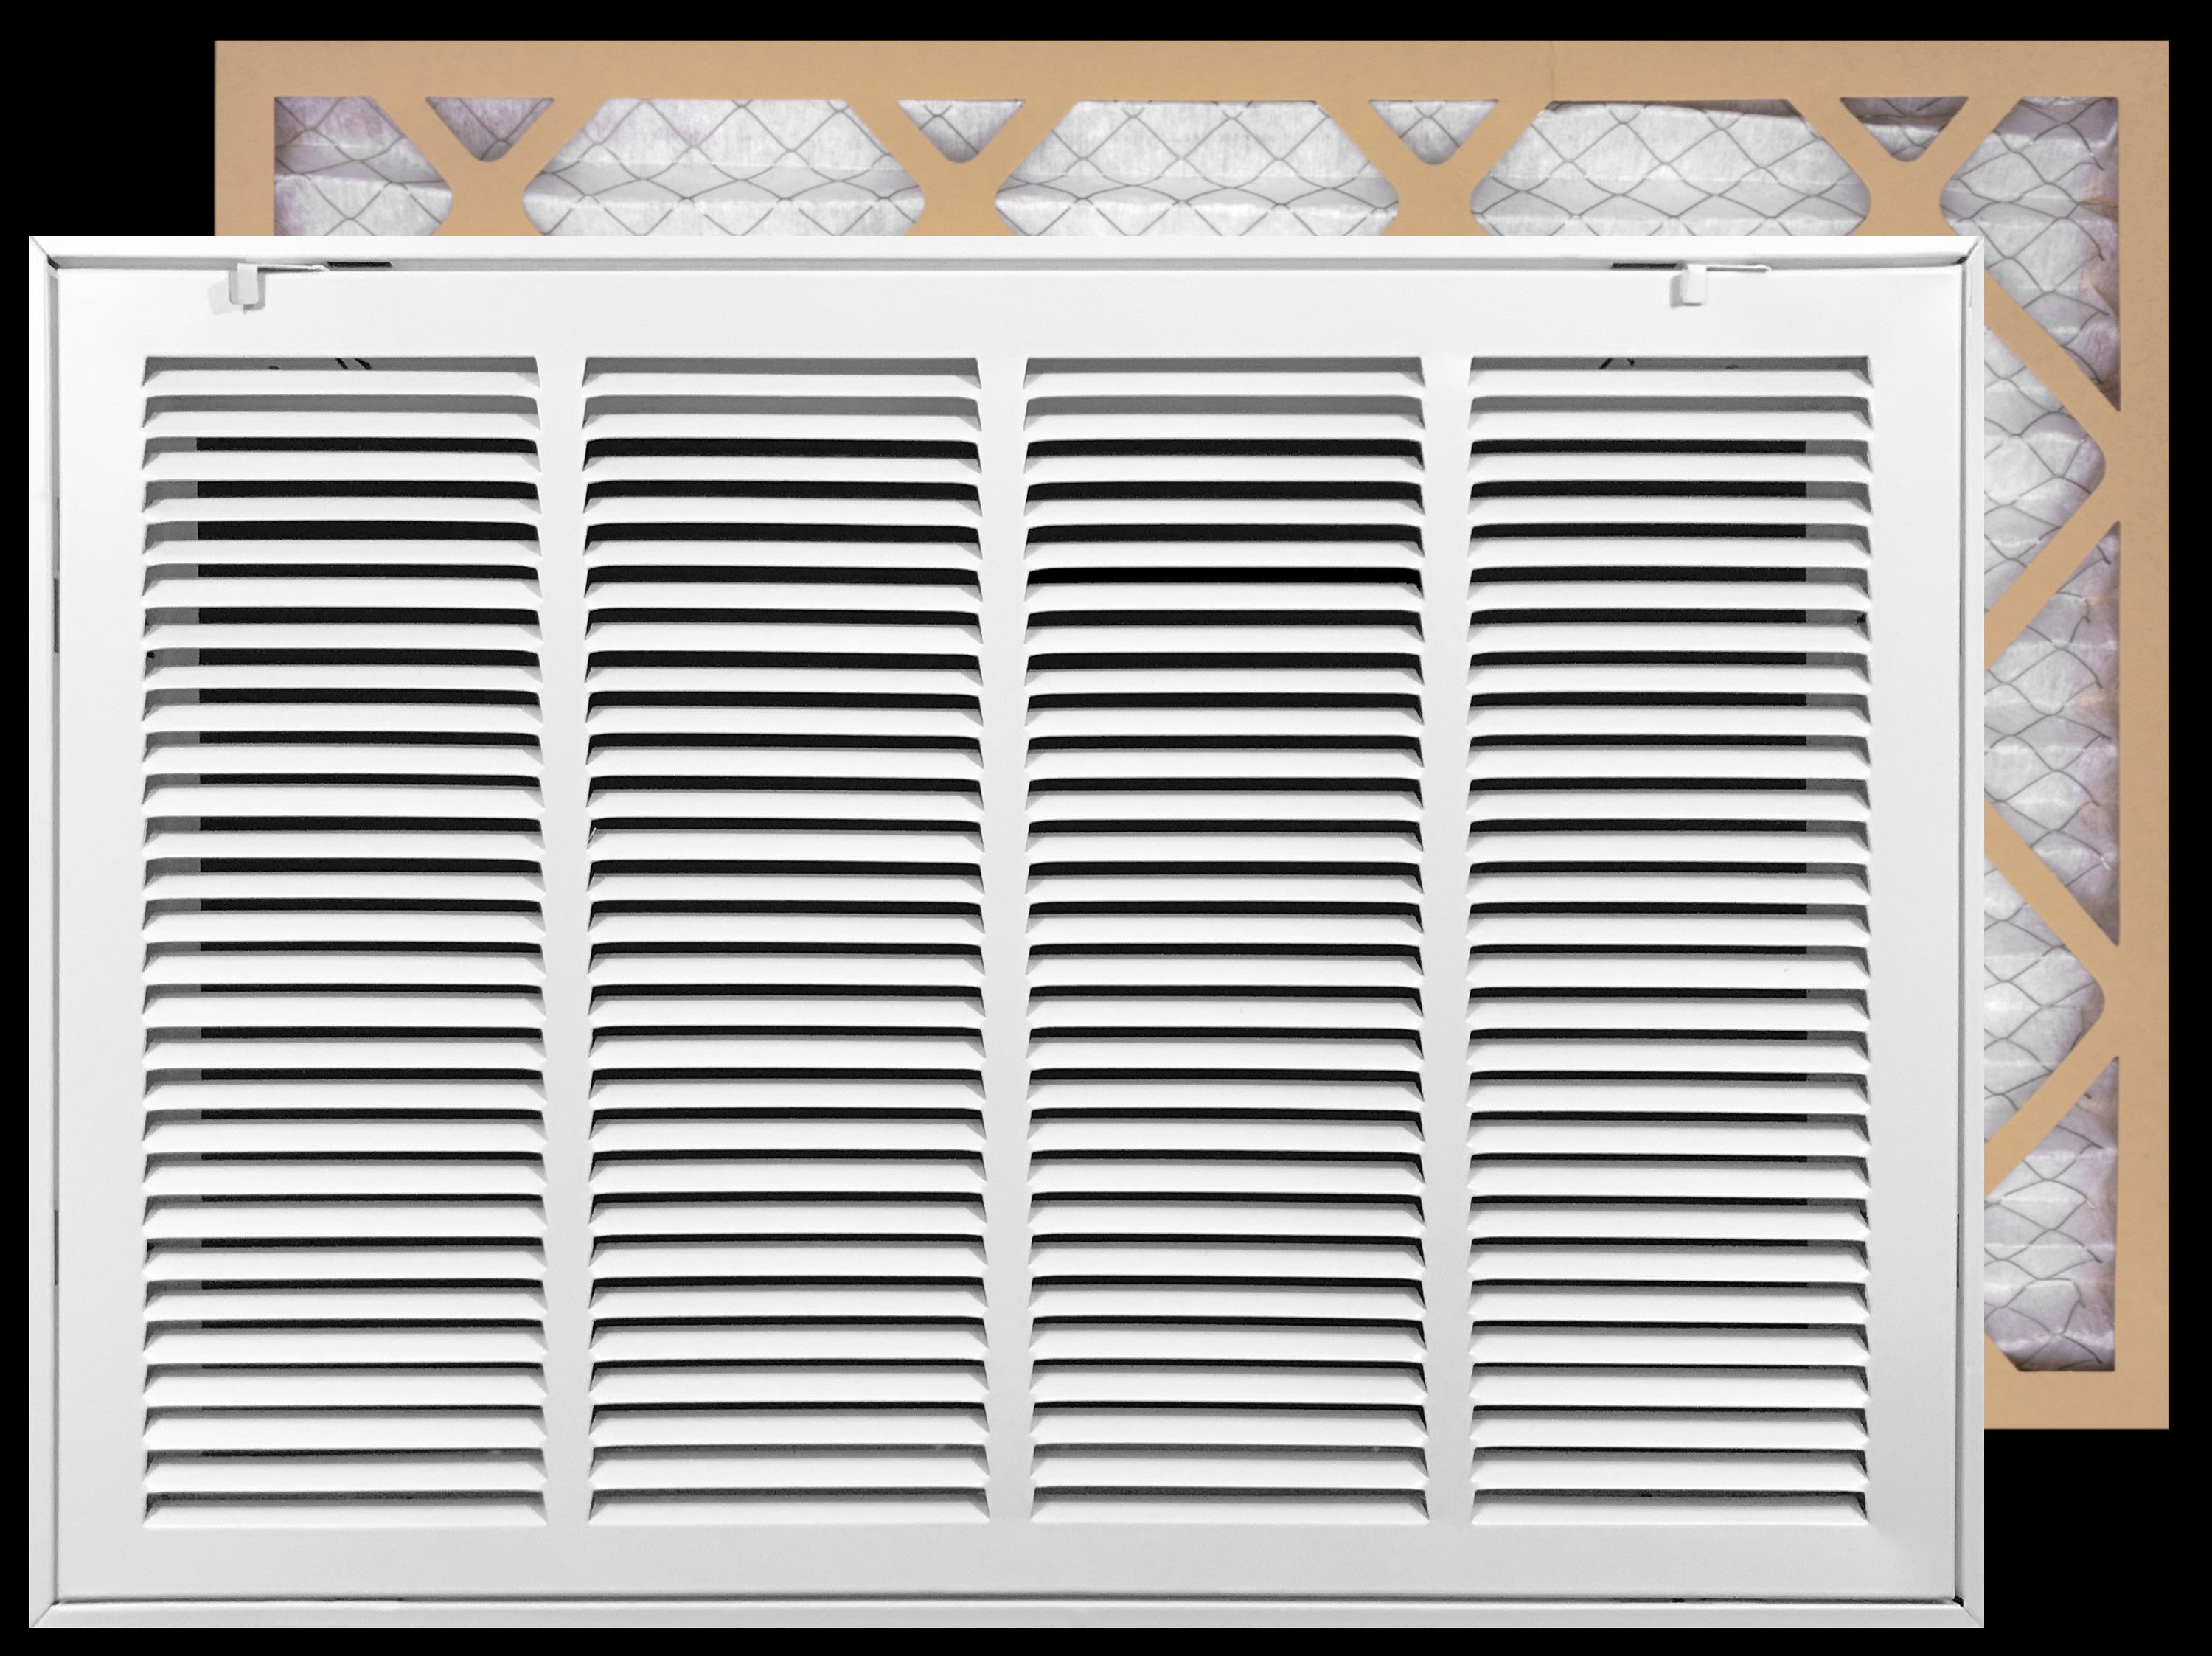 airgrilles 24" x 12" duct opening   filter included hd steel return air filter grille for sidewall and ceiling fil-7rafg1-wh-24x12 038775643931 - 1